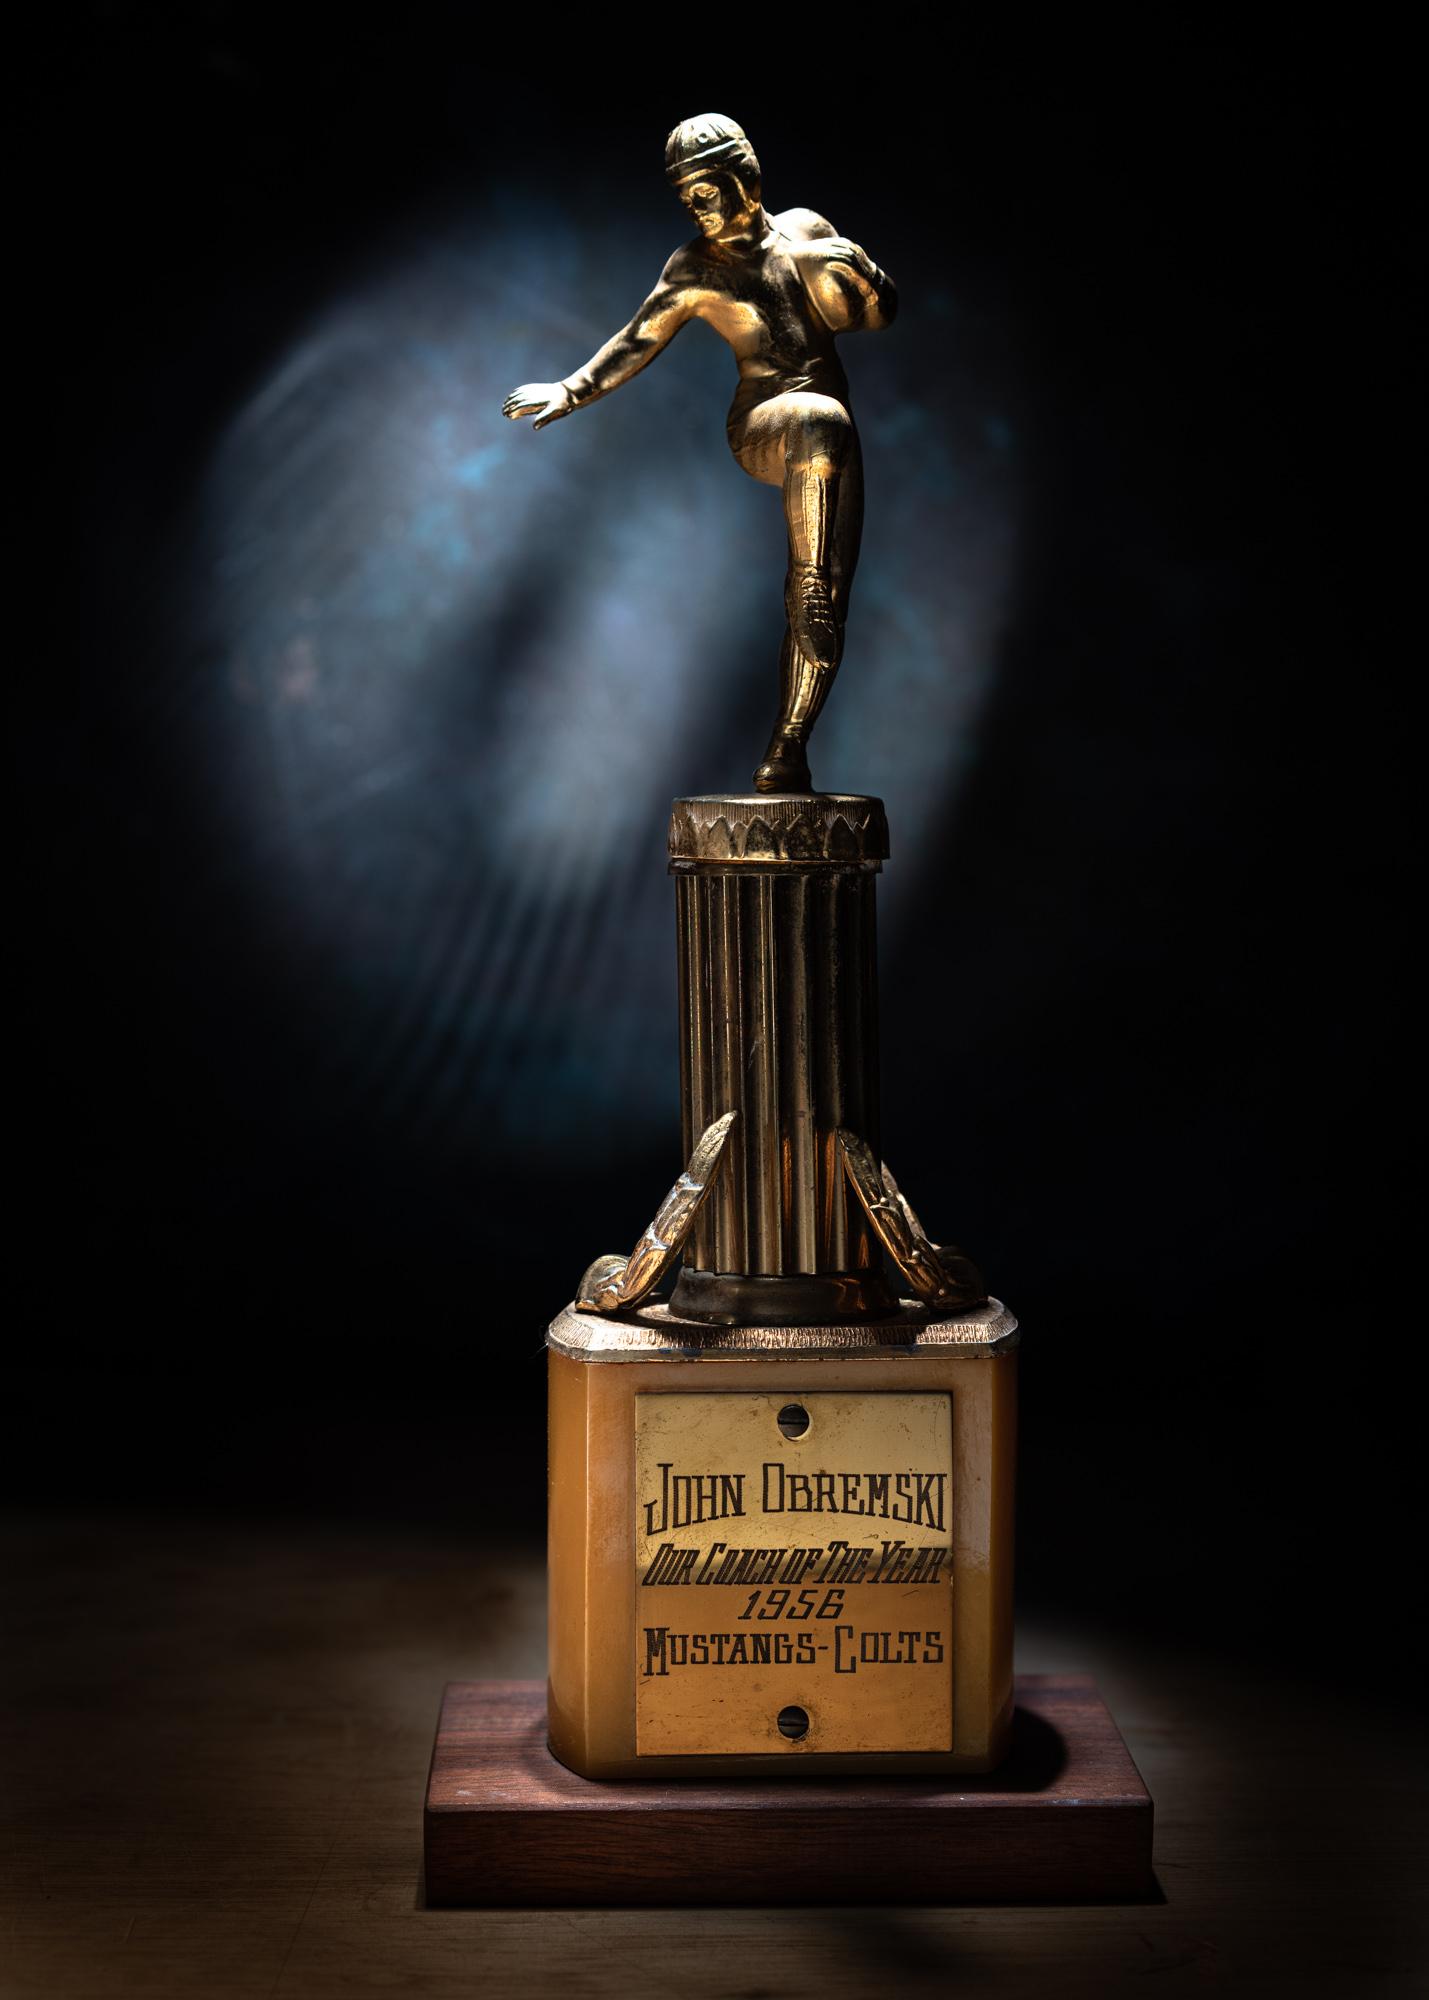 Limited Edition Color Photograph - Classic Vintage Sports Trophy, 2024, 17 x 22. Still life archival photograph created from the photographer's personal collection of vintage trophies.

About Howard Lewis:
Lewis’ artistic practice often explores